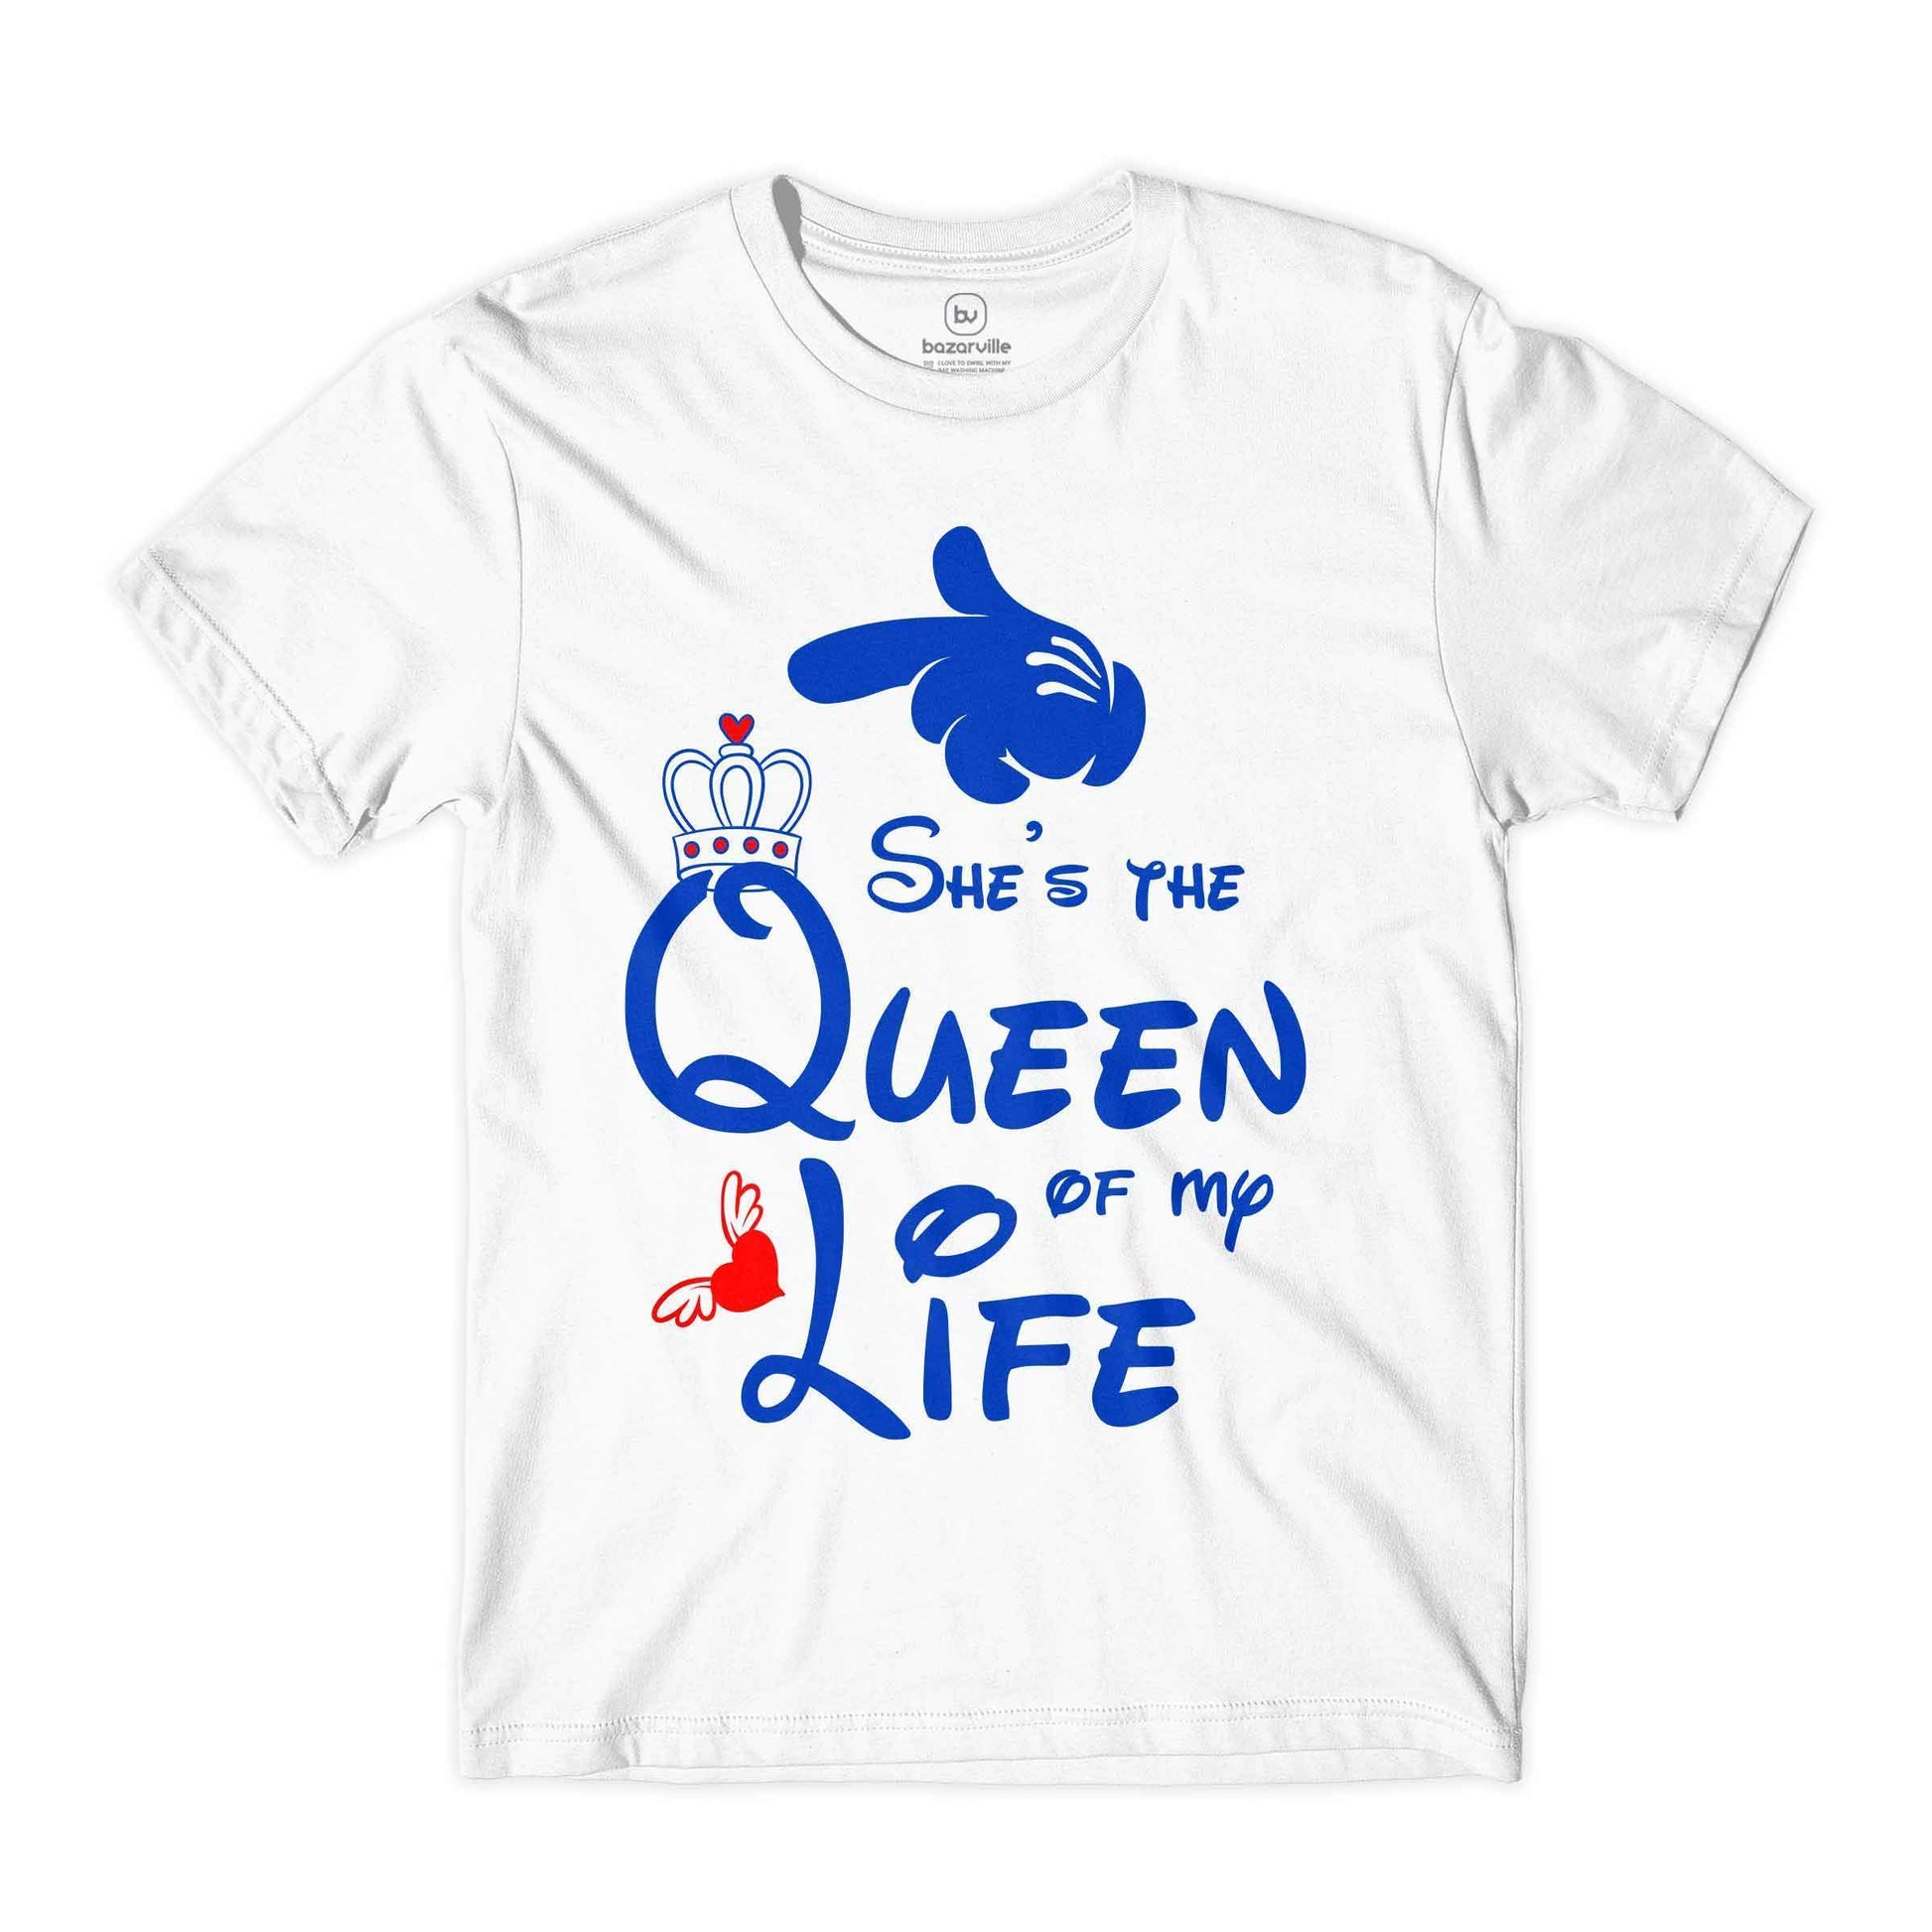 Bazarville Couple Design White / MEN / XS King Queen Of My Heart - Couple Tee